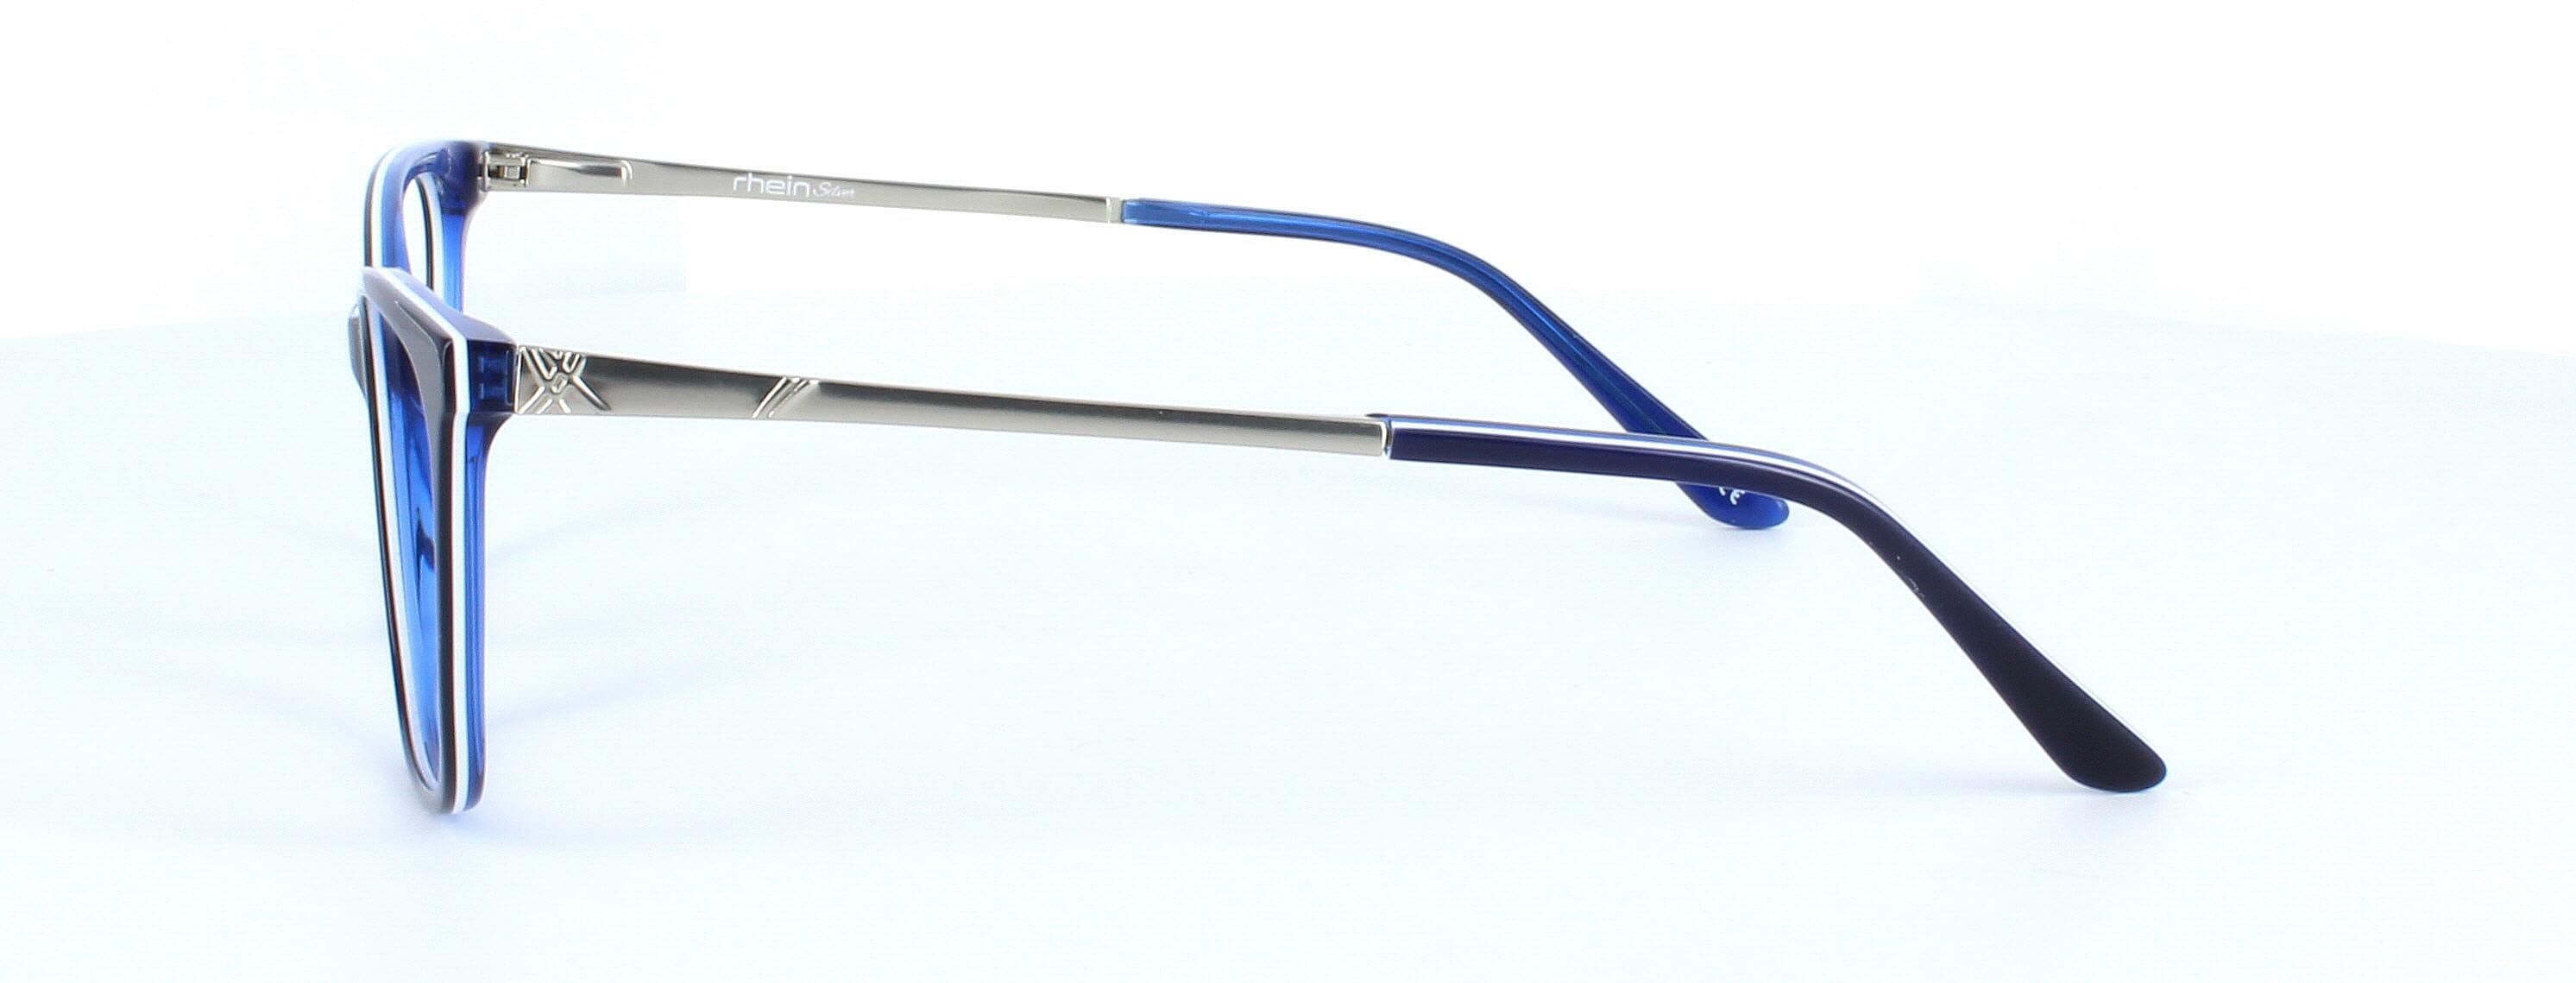 Ballina - ladies cat eye shaped acetate glasses here in blue - image view 2